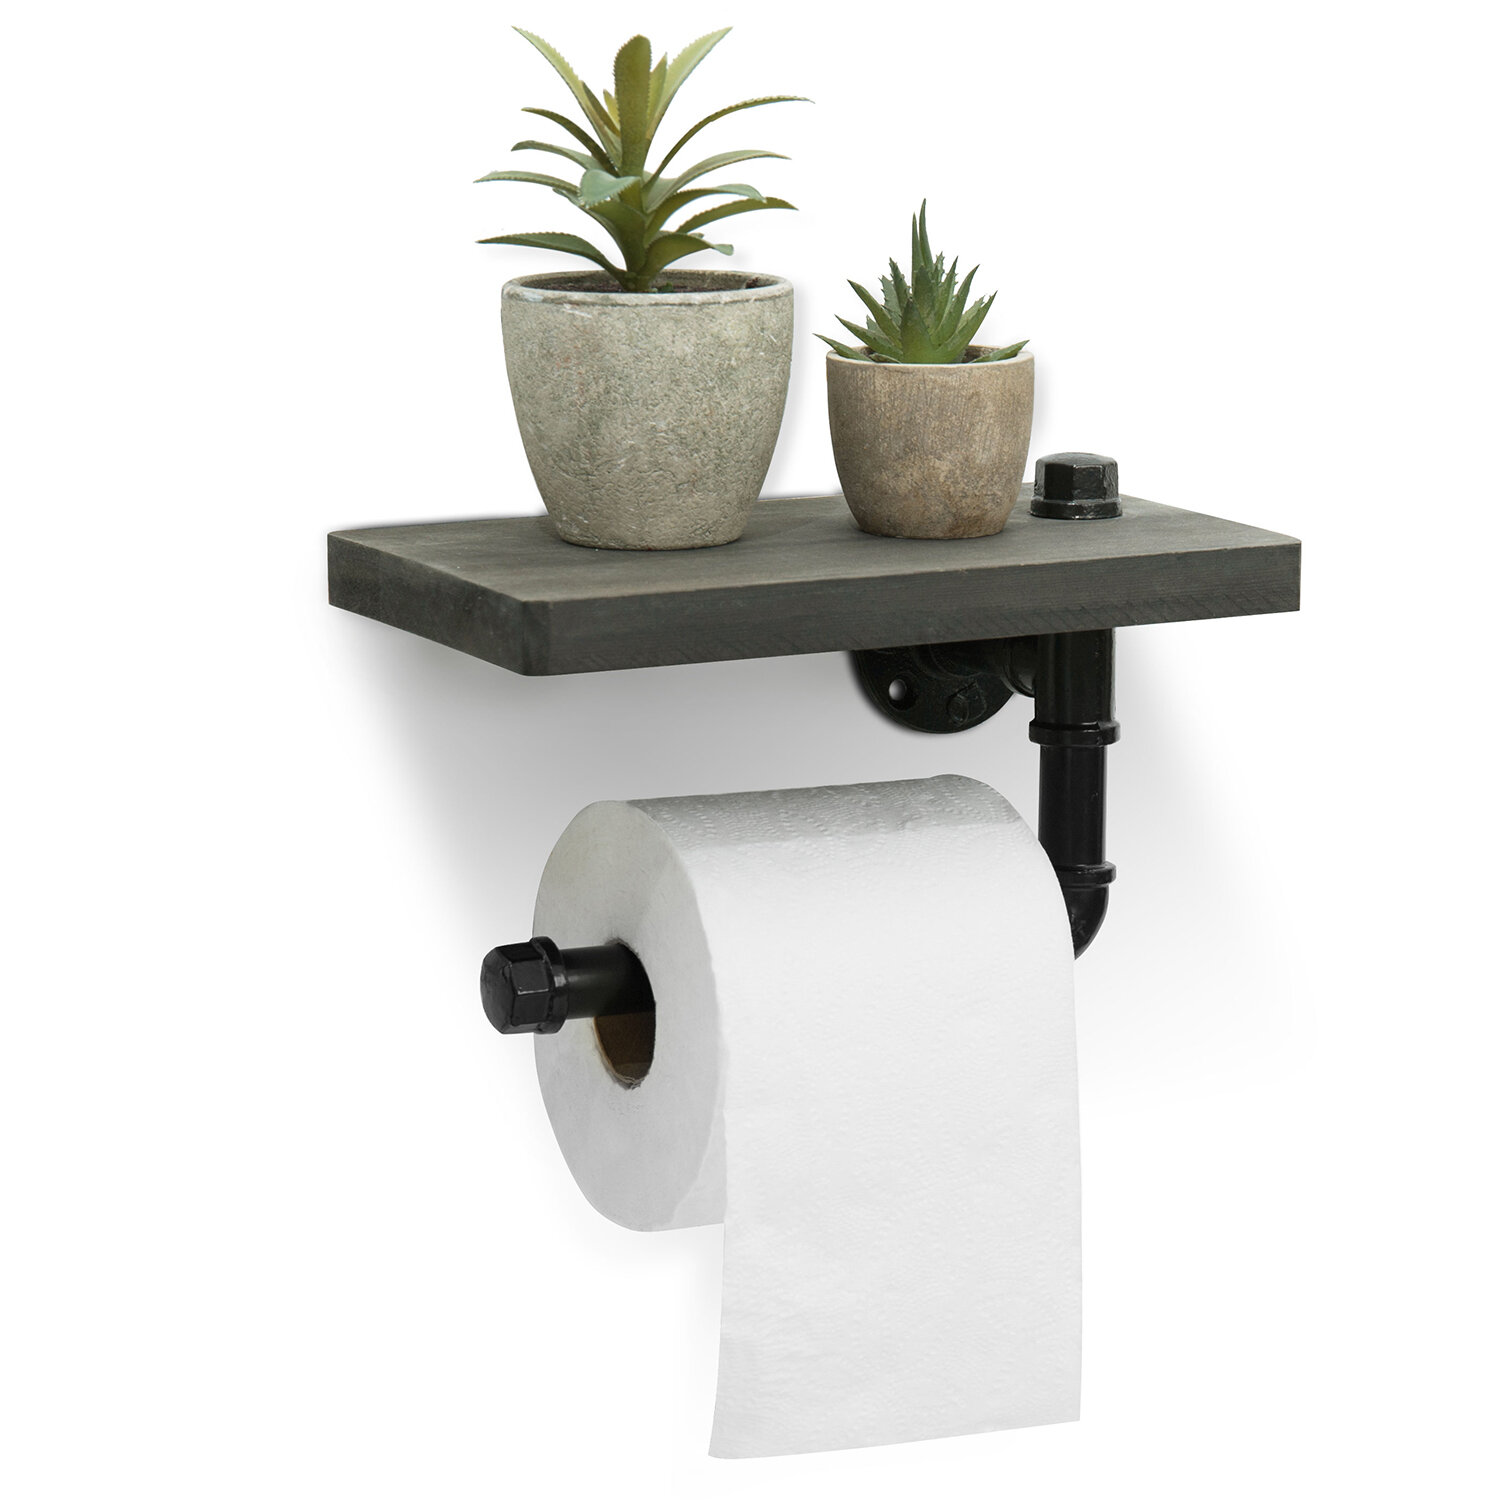 LOTESTO Wall Mount Toilet Paper Holder